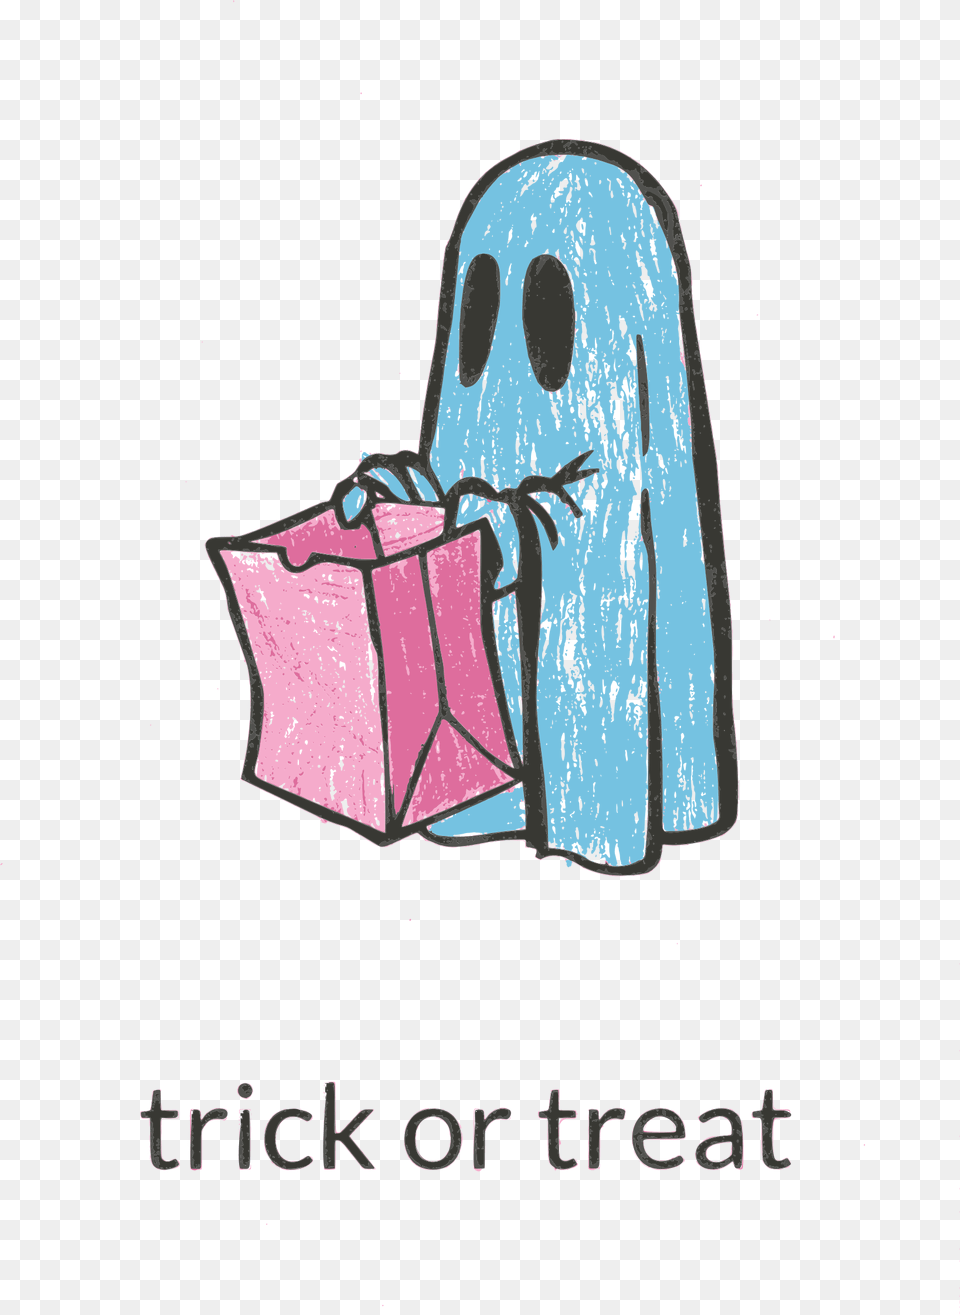 This Icons Design Of Trick Or Treat Recolored, Bed, Furniture Free Png